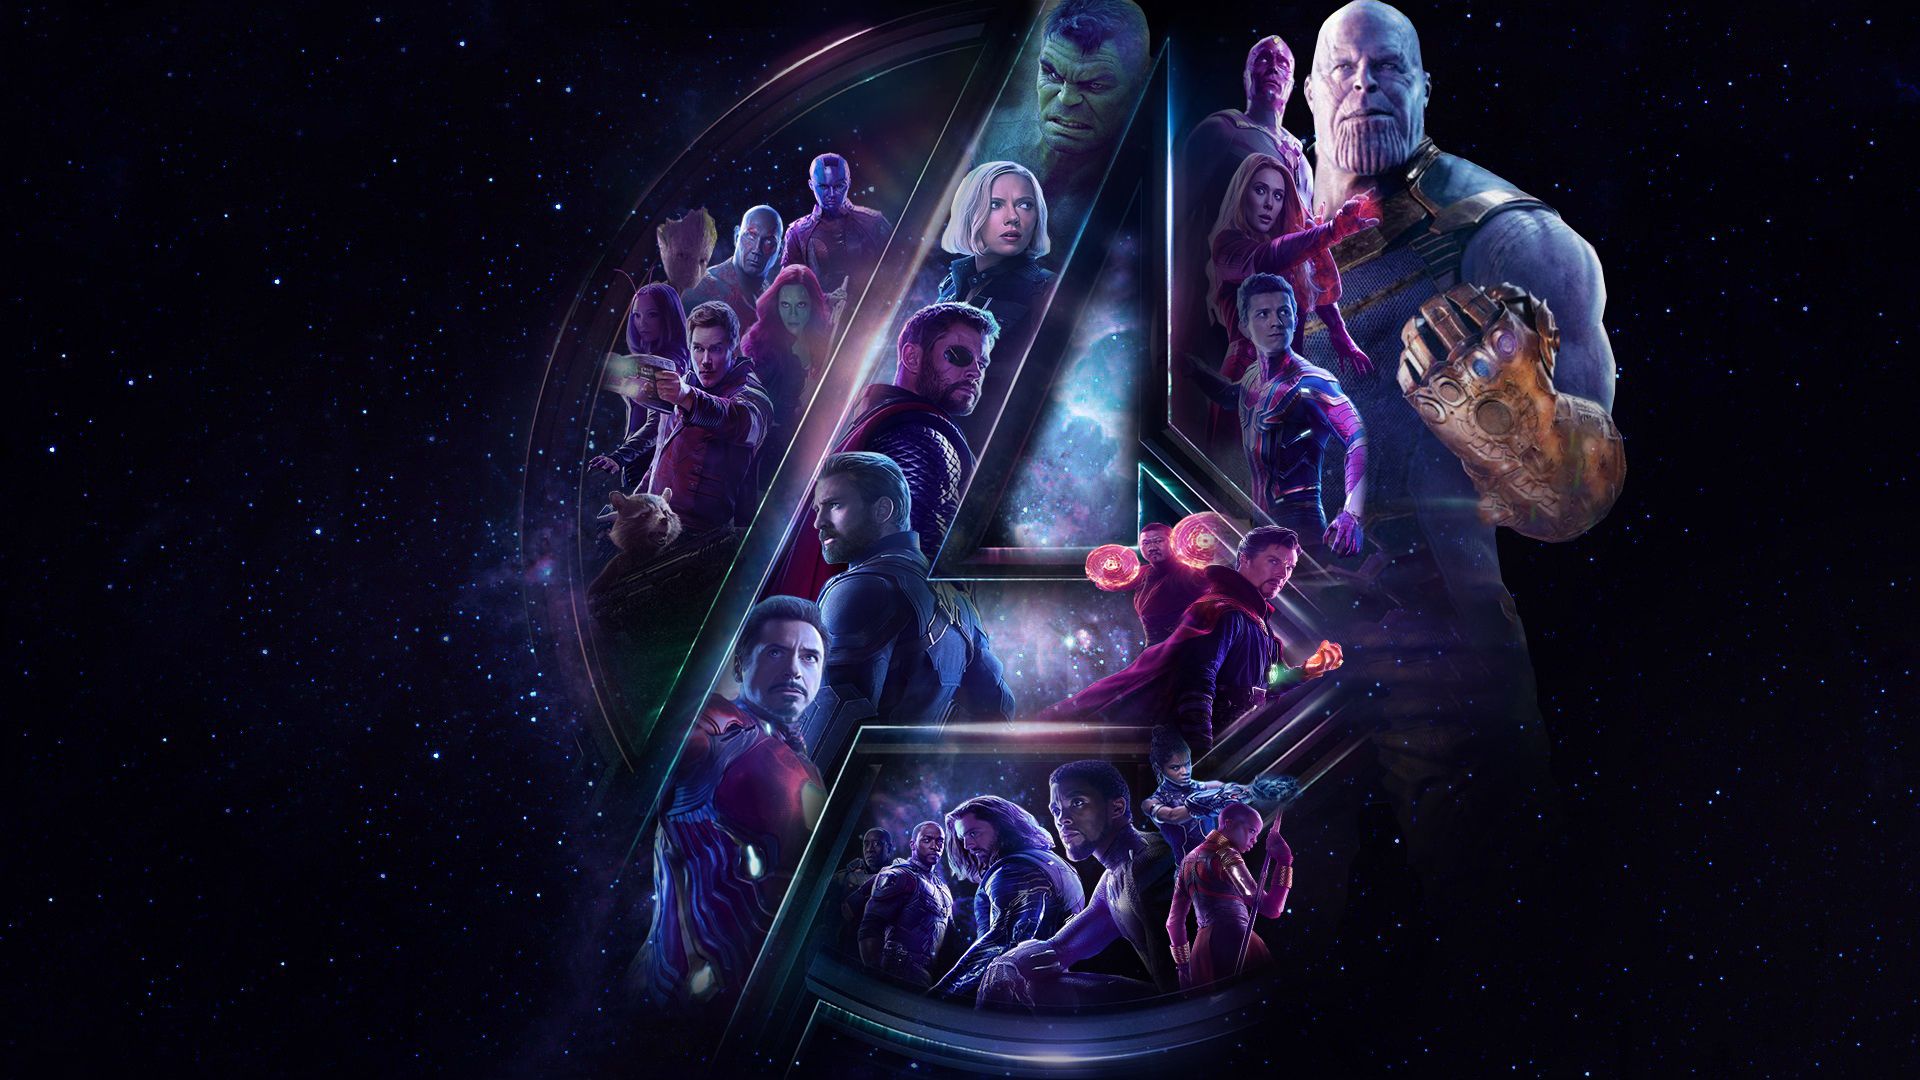 Avengers Infinity War Characters Poster 2048x1152 Resolution HD 4k Wallpaper, Image, Background, Photo and Picture